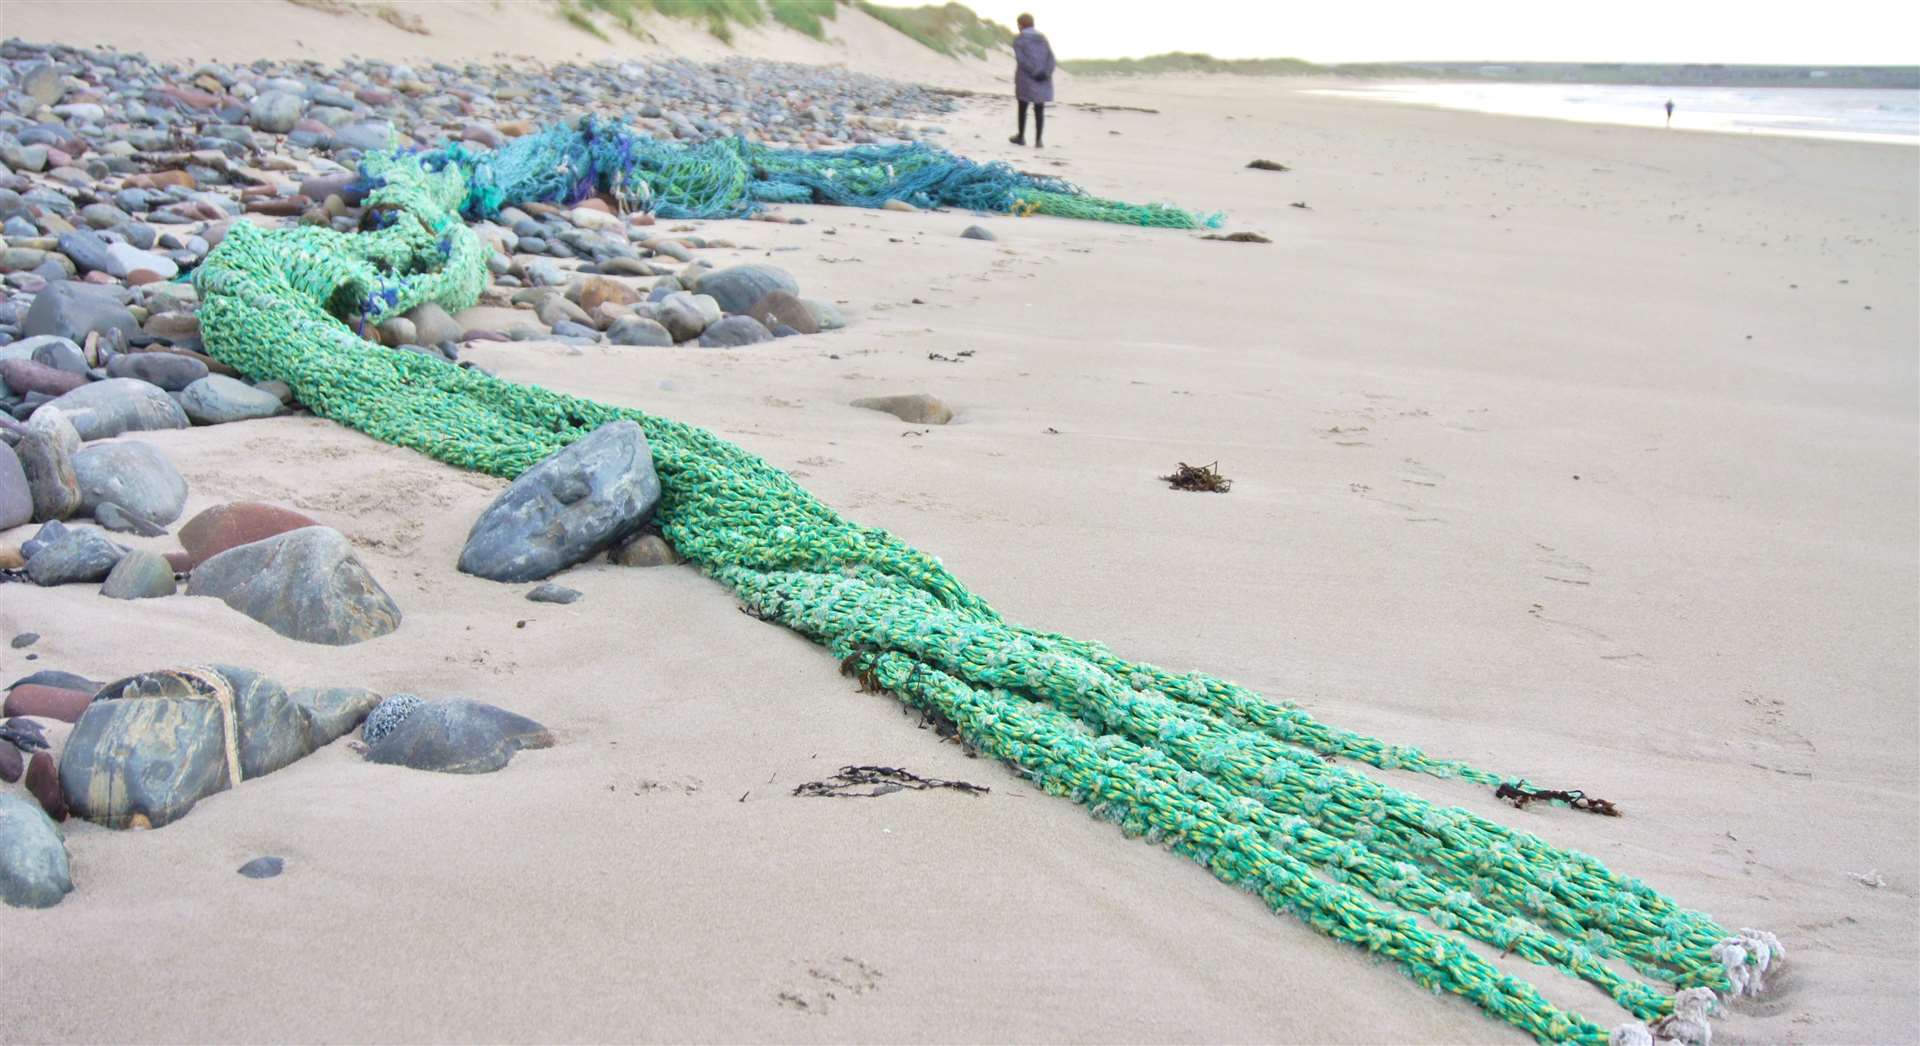 Beach-cleaning volunteers have been removing nets and other plastic pollution from the Caithness coastline with the help of various social media groups. The total weight uplifted since March is over 7.5 tons, according to the Facebook group Caithness Beach Cleans. Picture: DGS